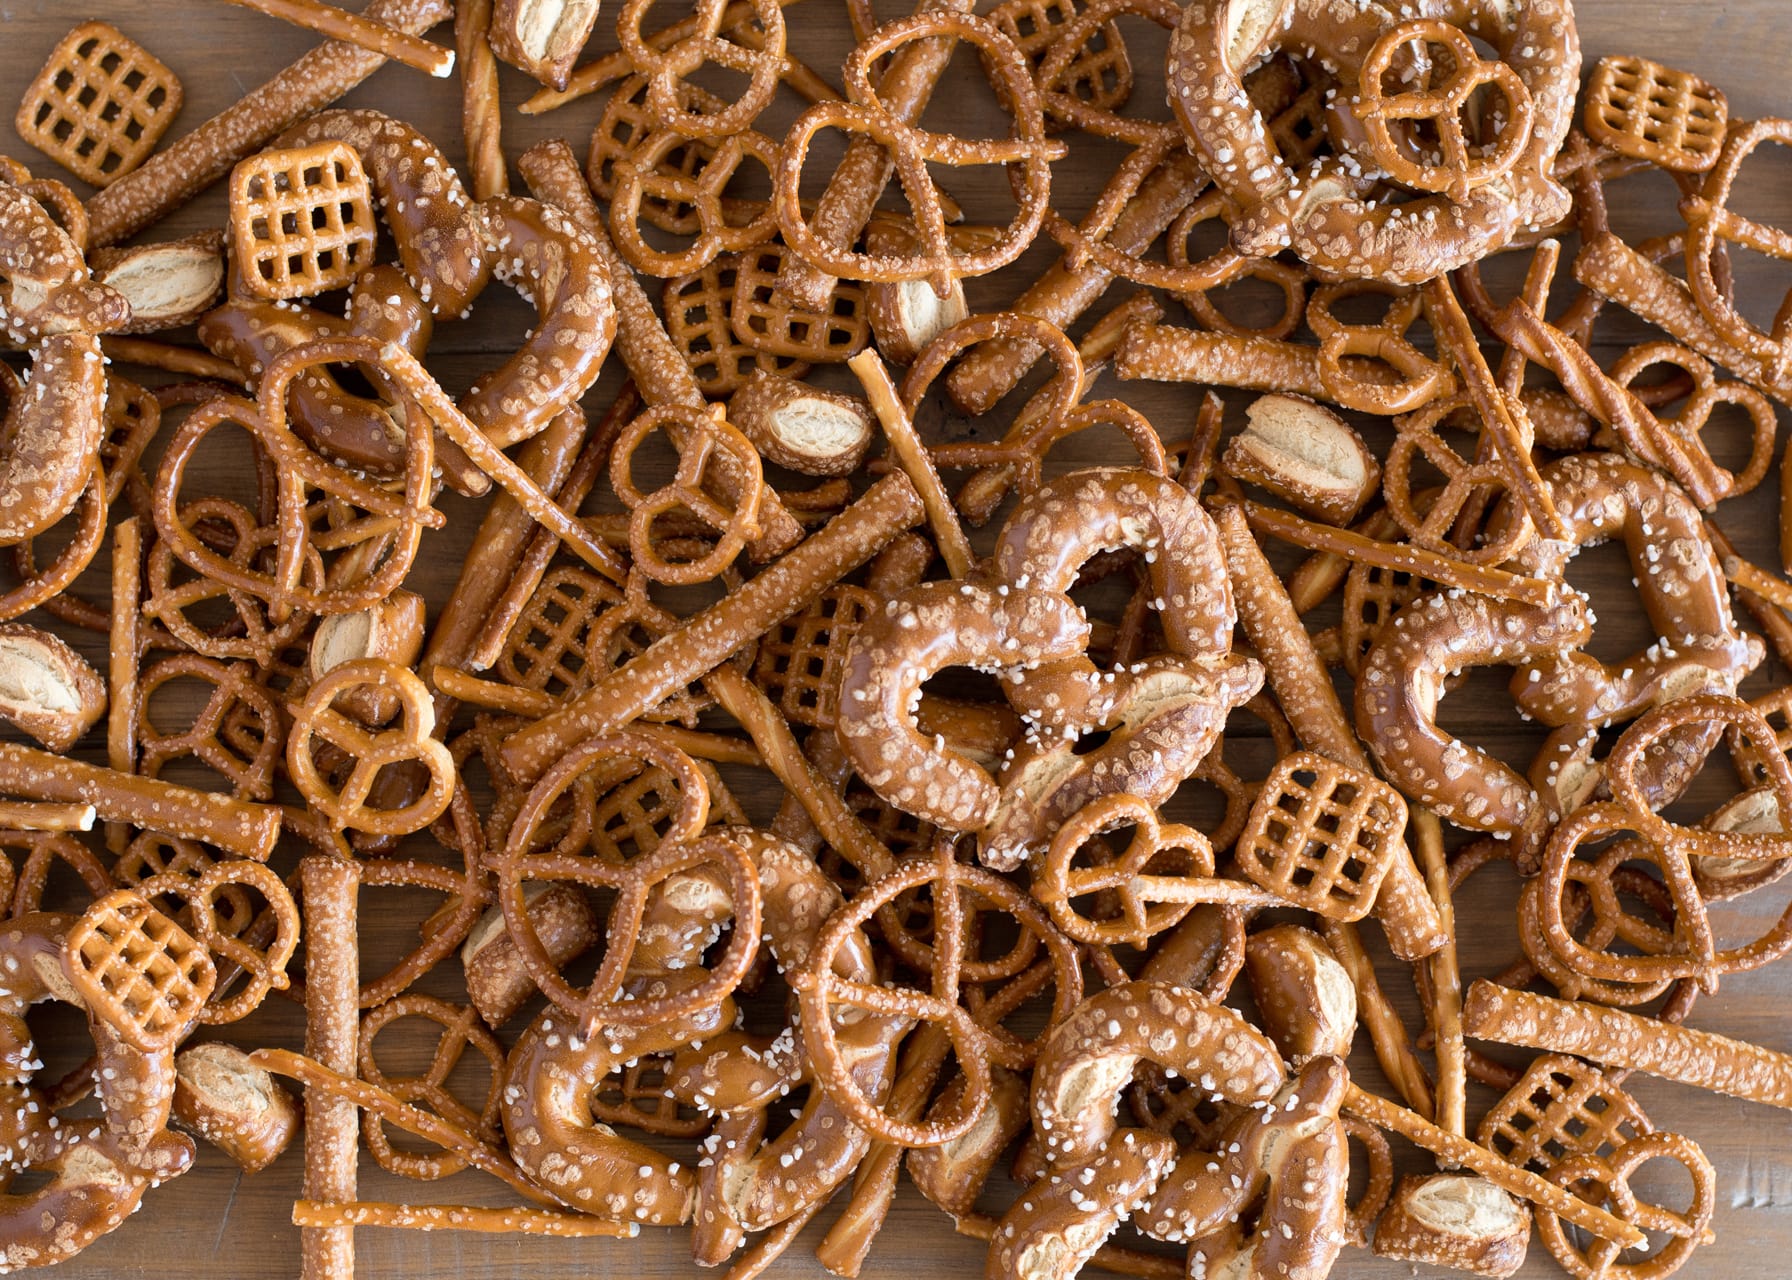 Photo of a pile of various types of small pretzels